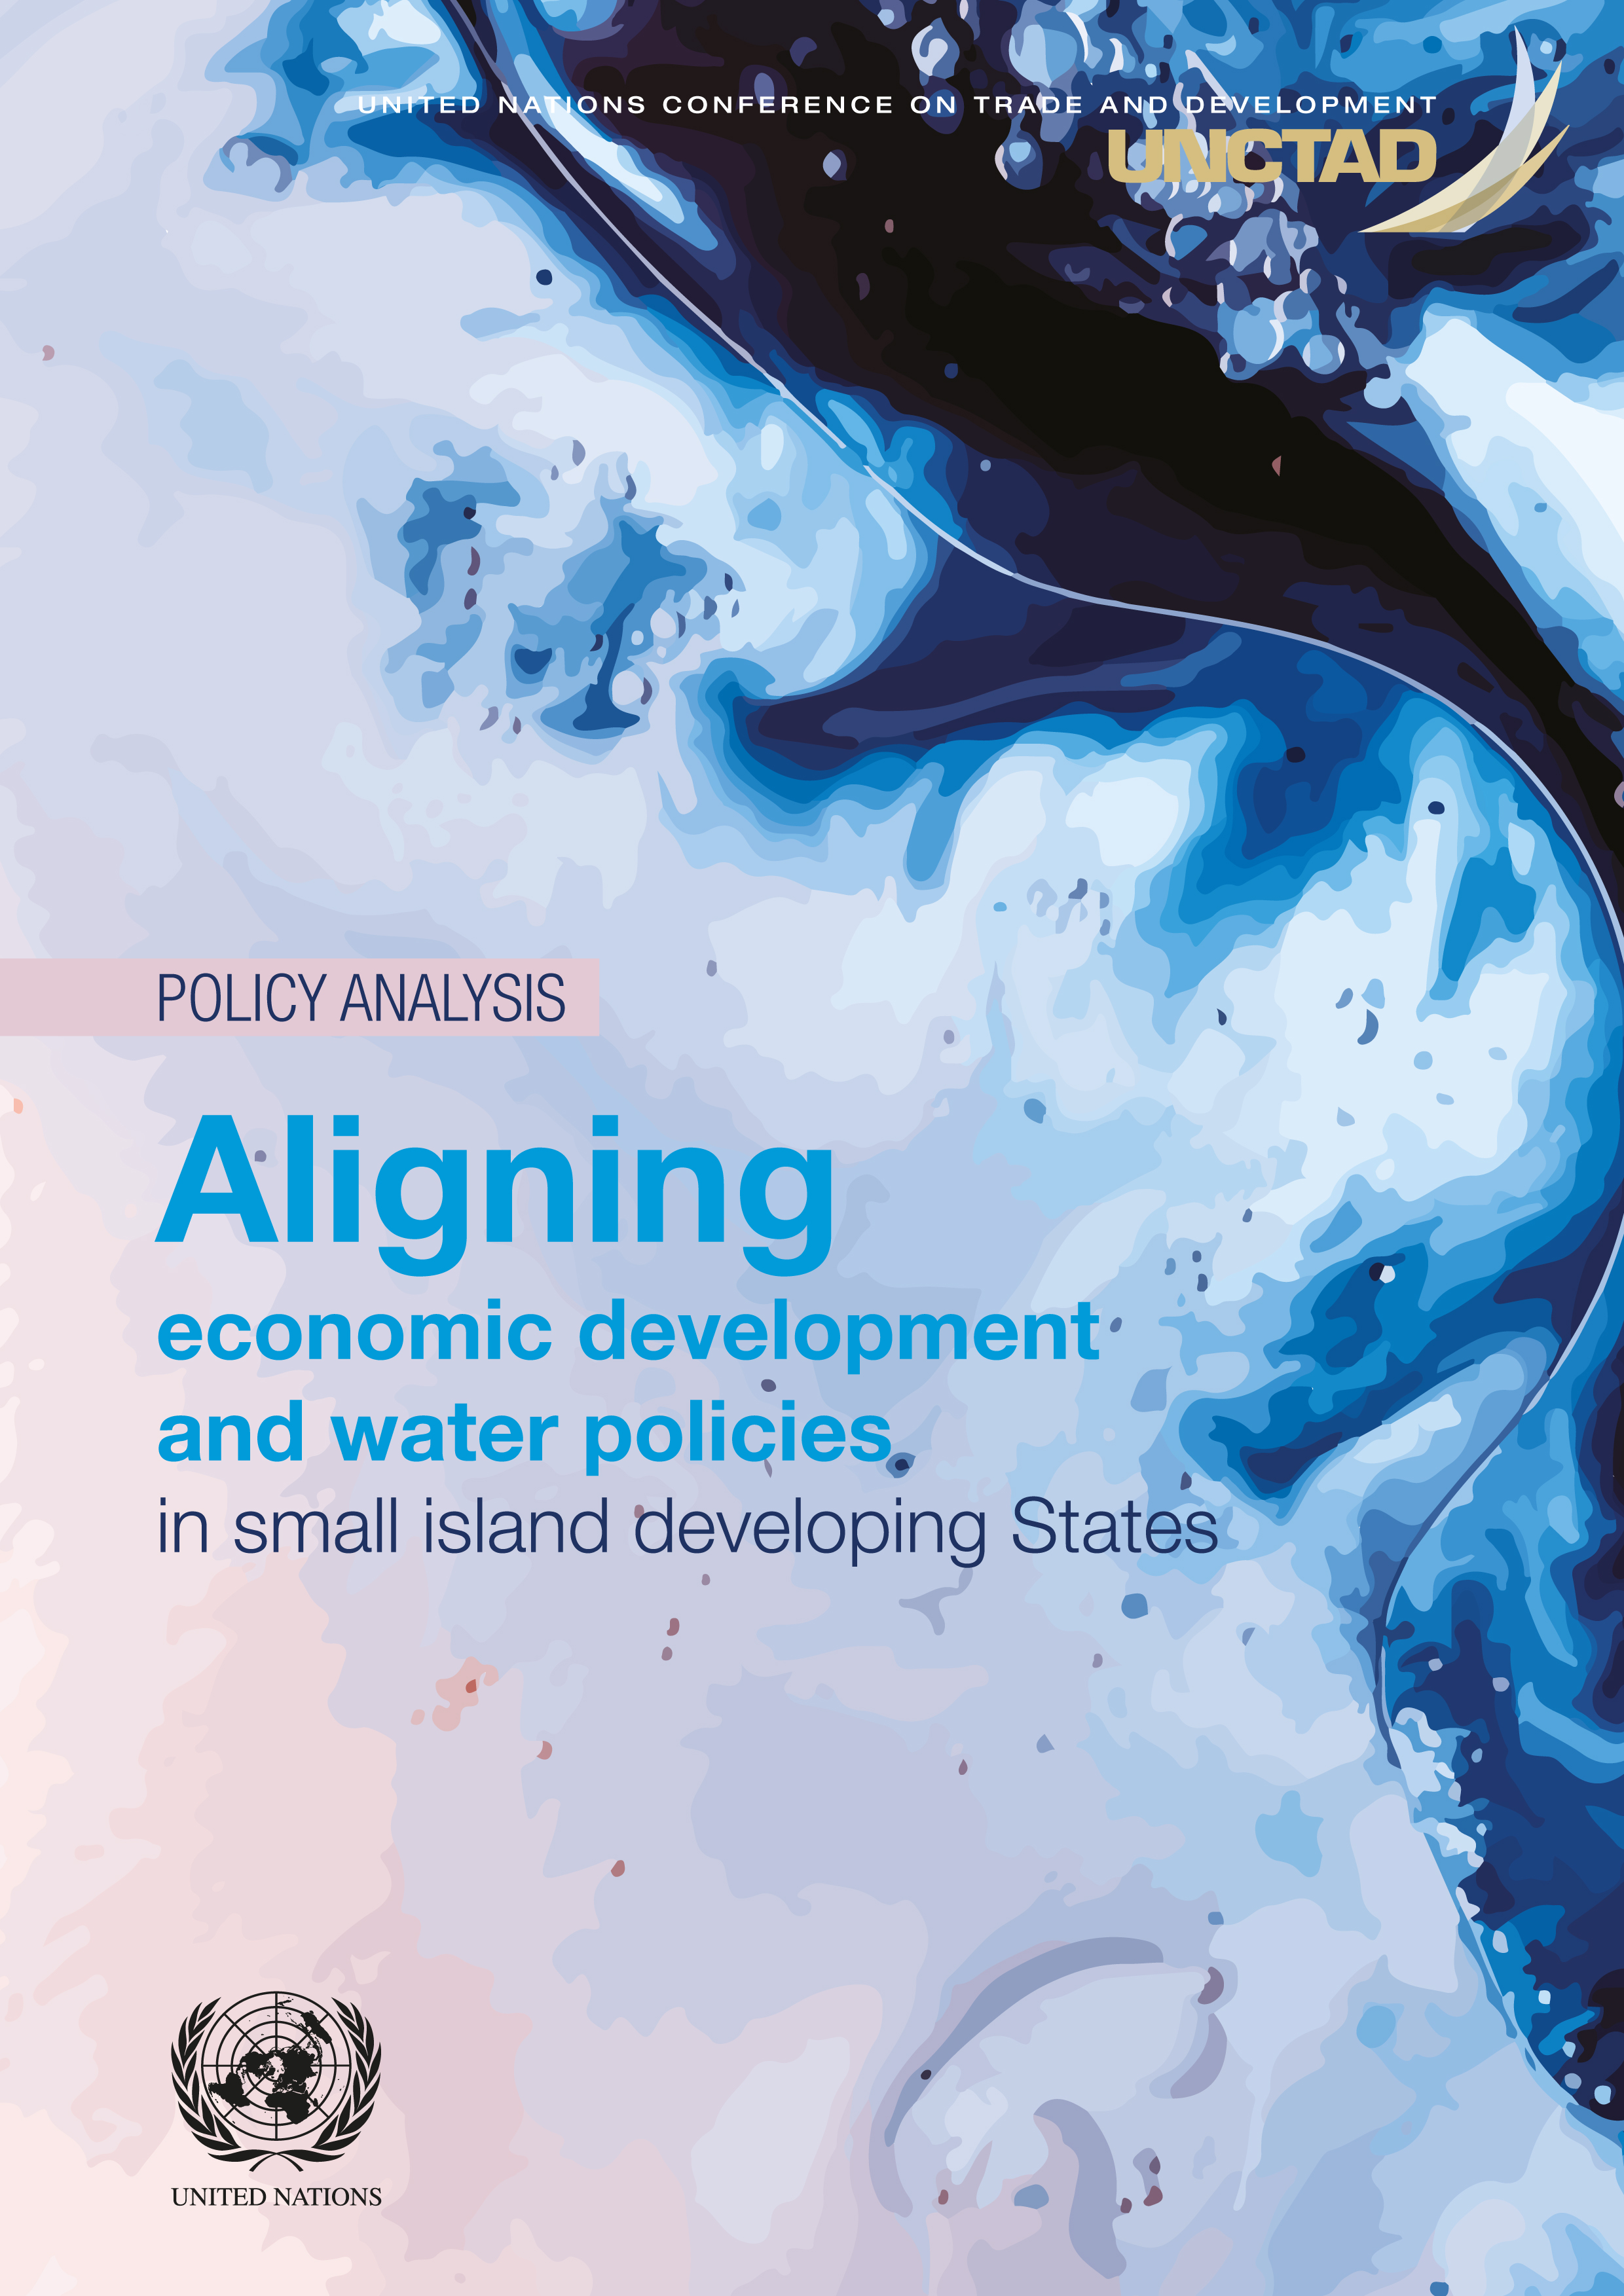 image of Water use in productive economic activities in SIDS